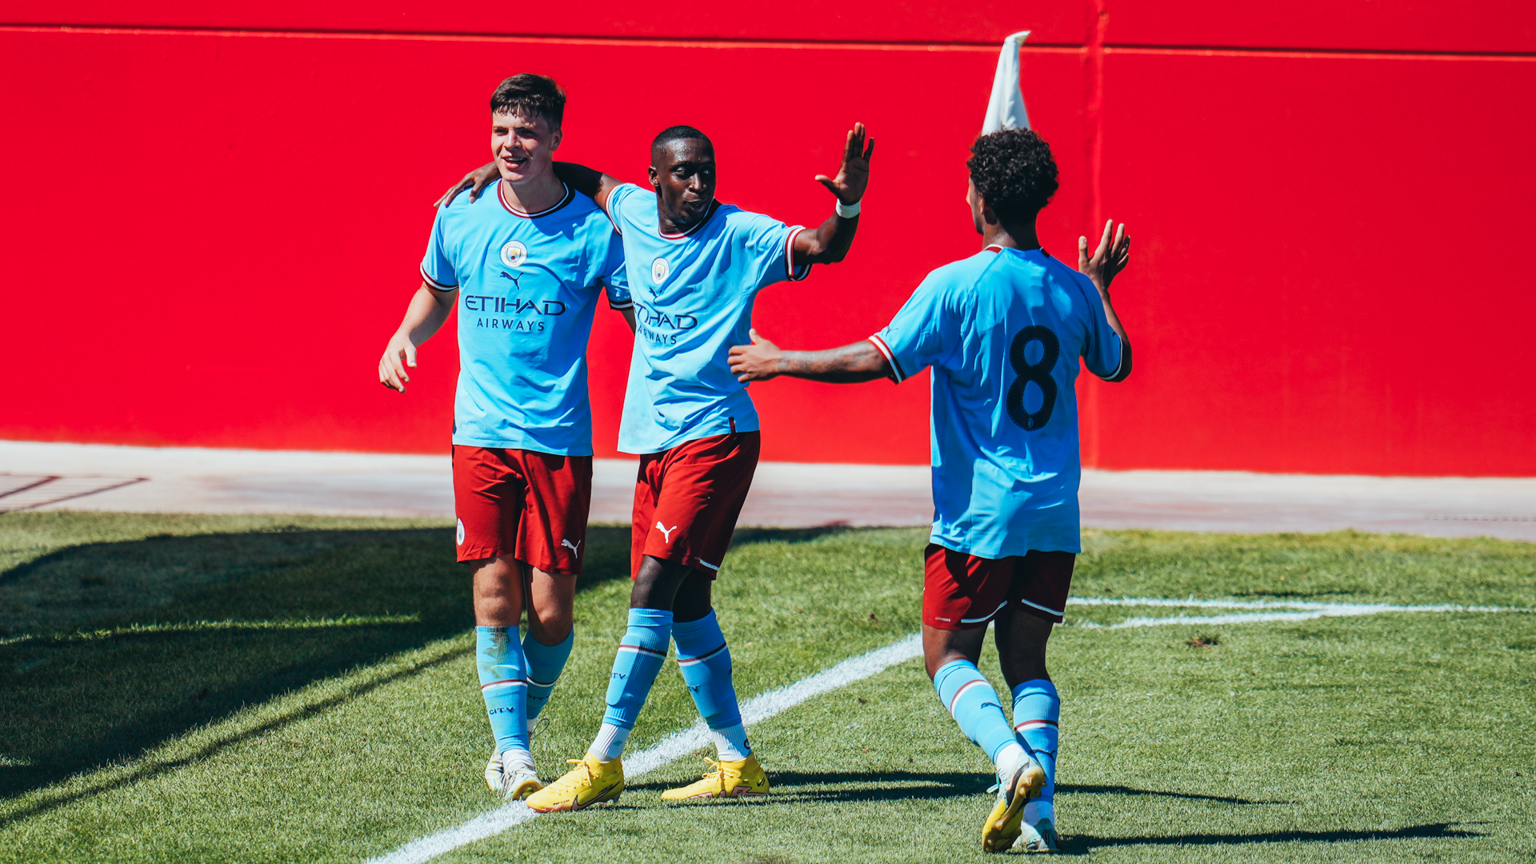 City off to UEFA Youth League flyer with fine win in Seville 